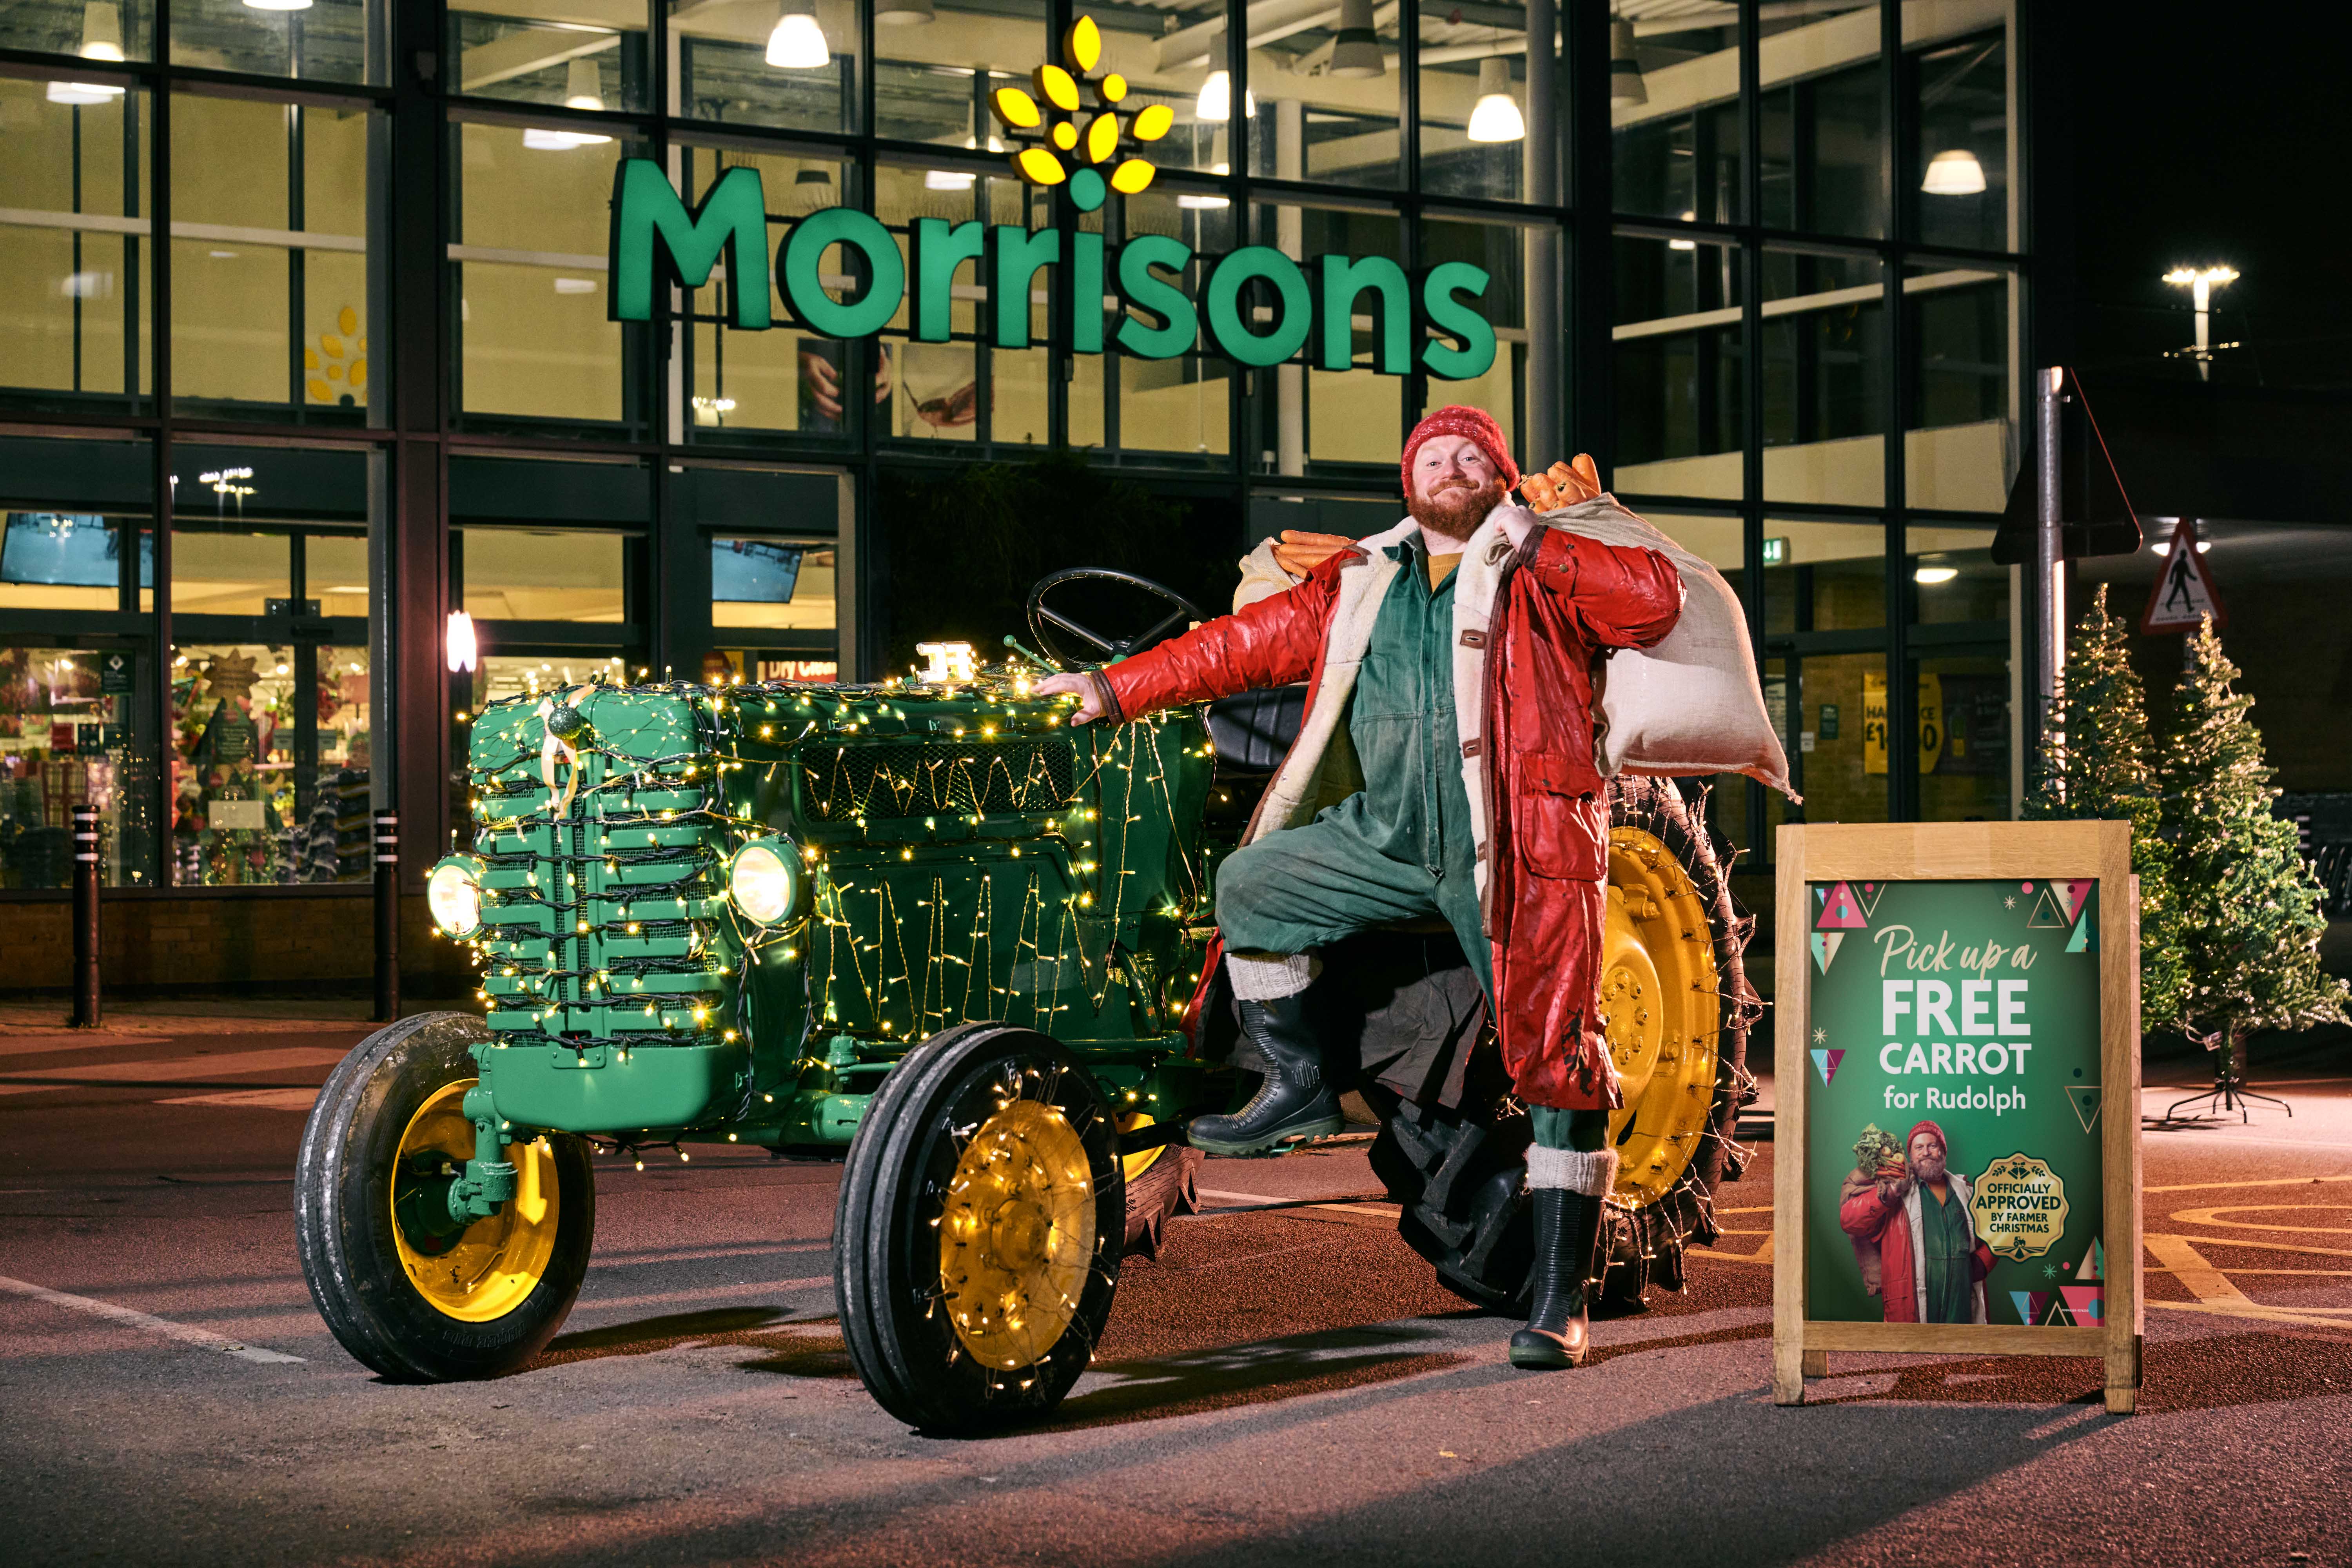 Free carrots for Rudolph at all Morrisons stores